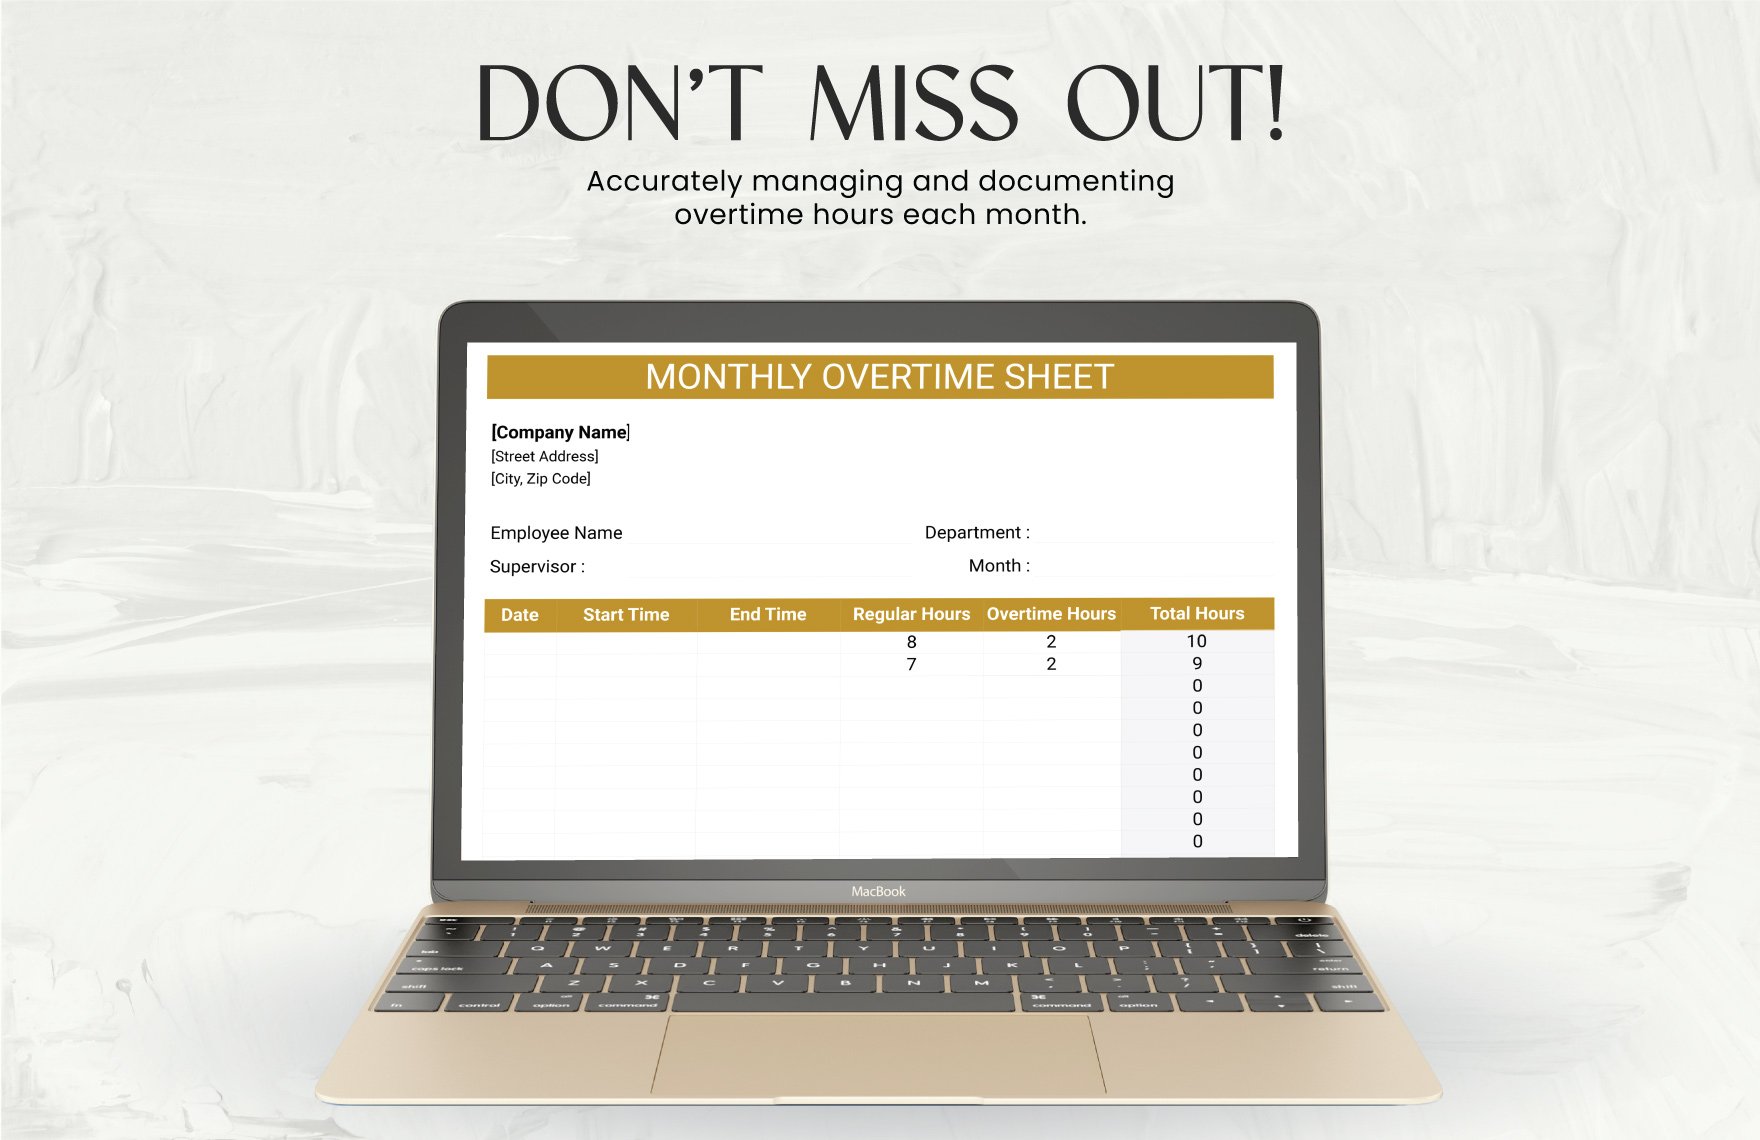 Monthly Overtime Sheet Template